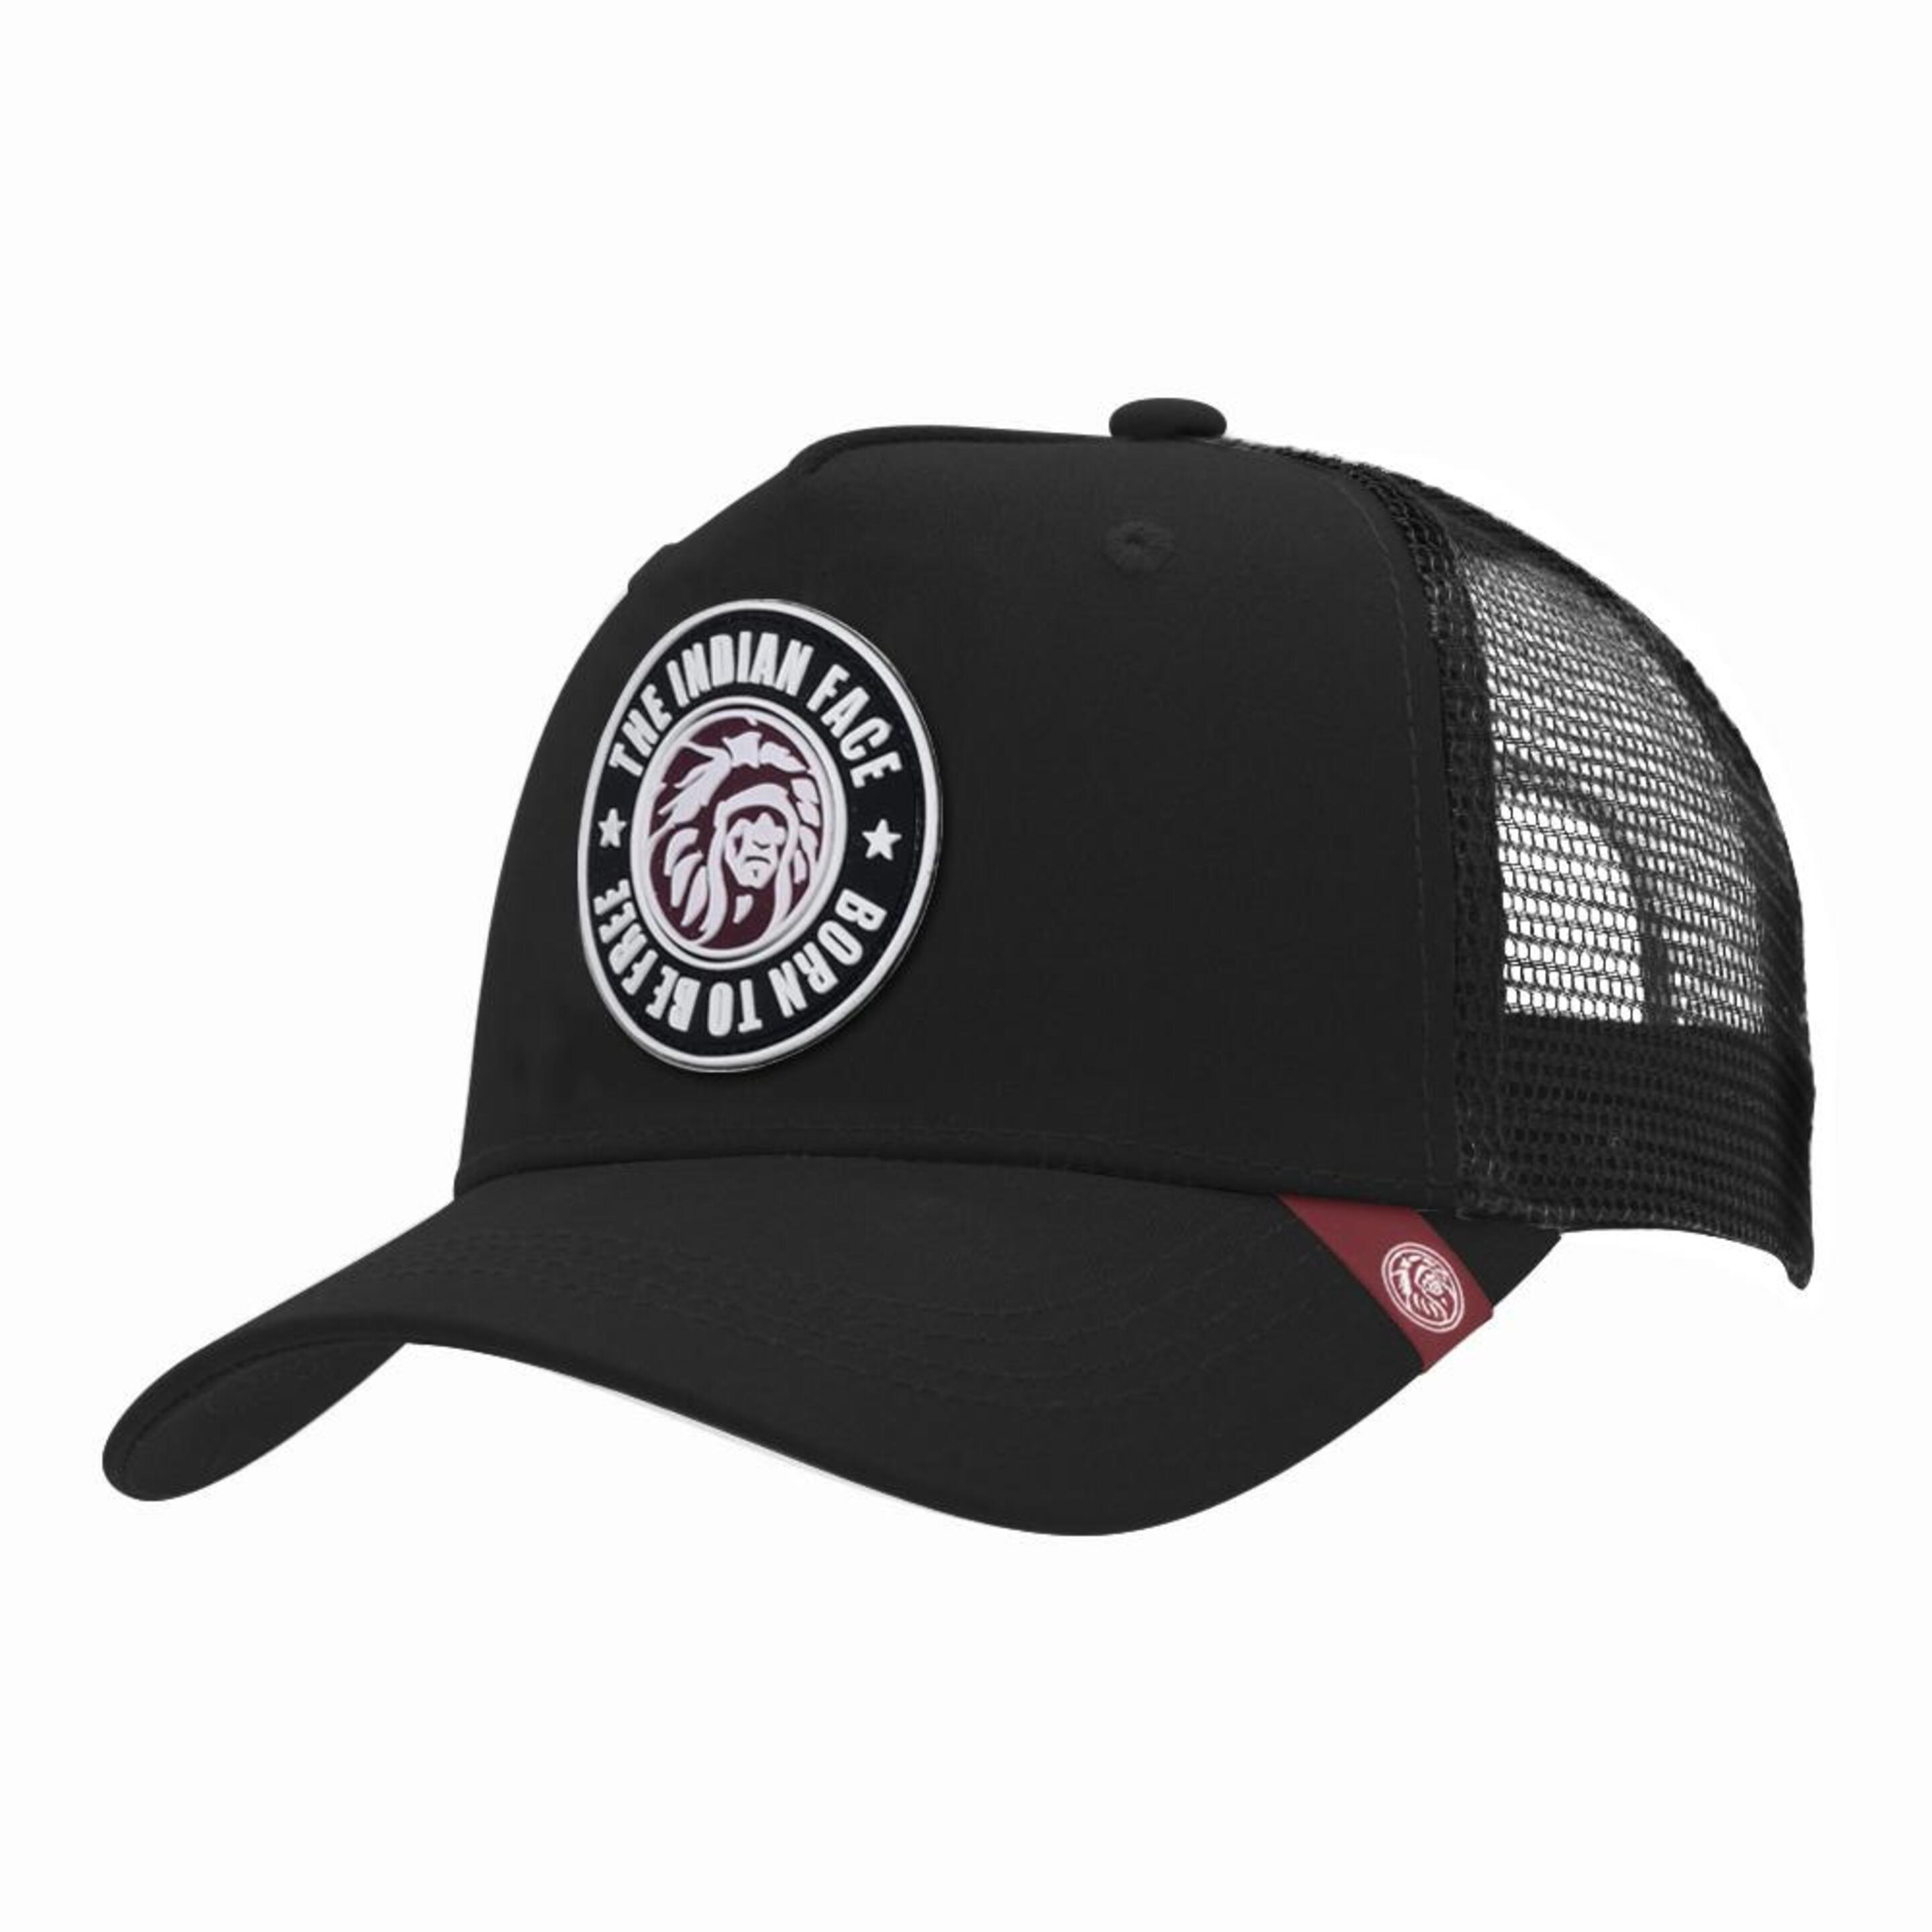 Gorra Trucker Born To Be Free Negro The Indian Face Para Hombre Y Mujer